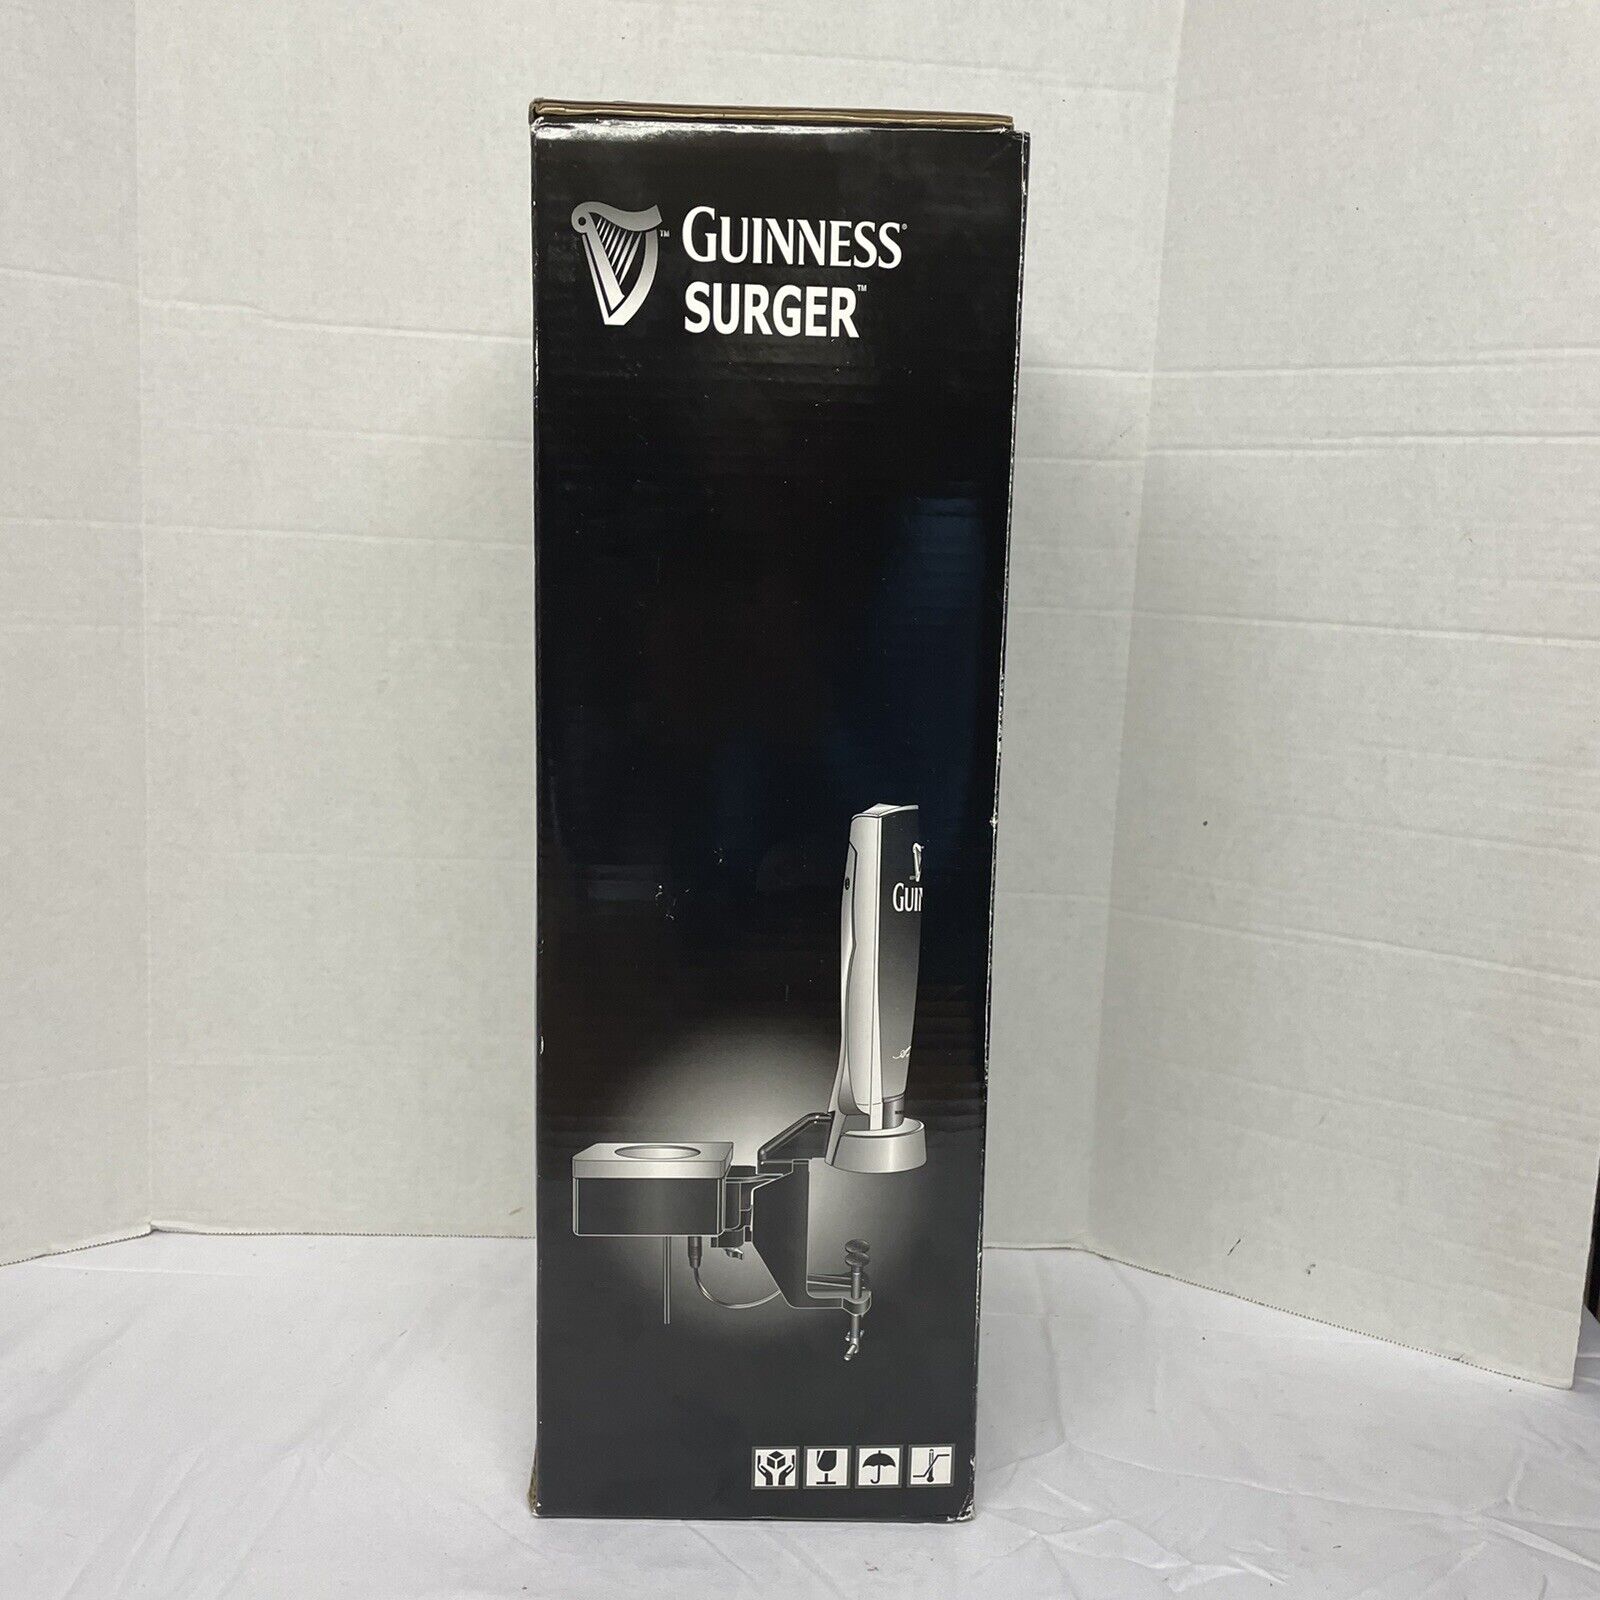 Guinness Surger New In Box. Commercial Bar Quality.